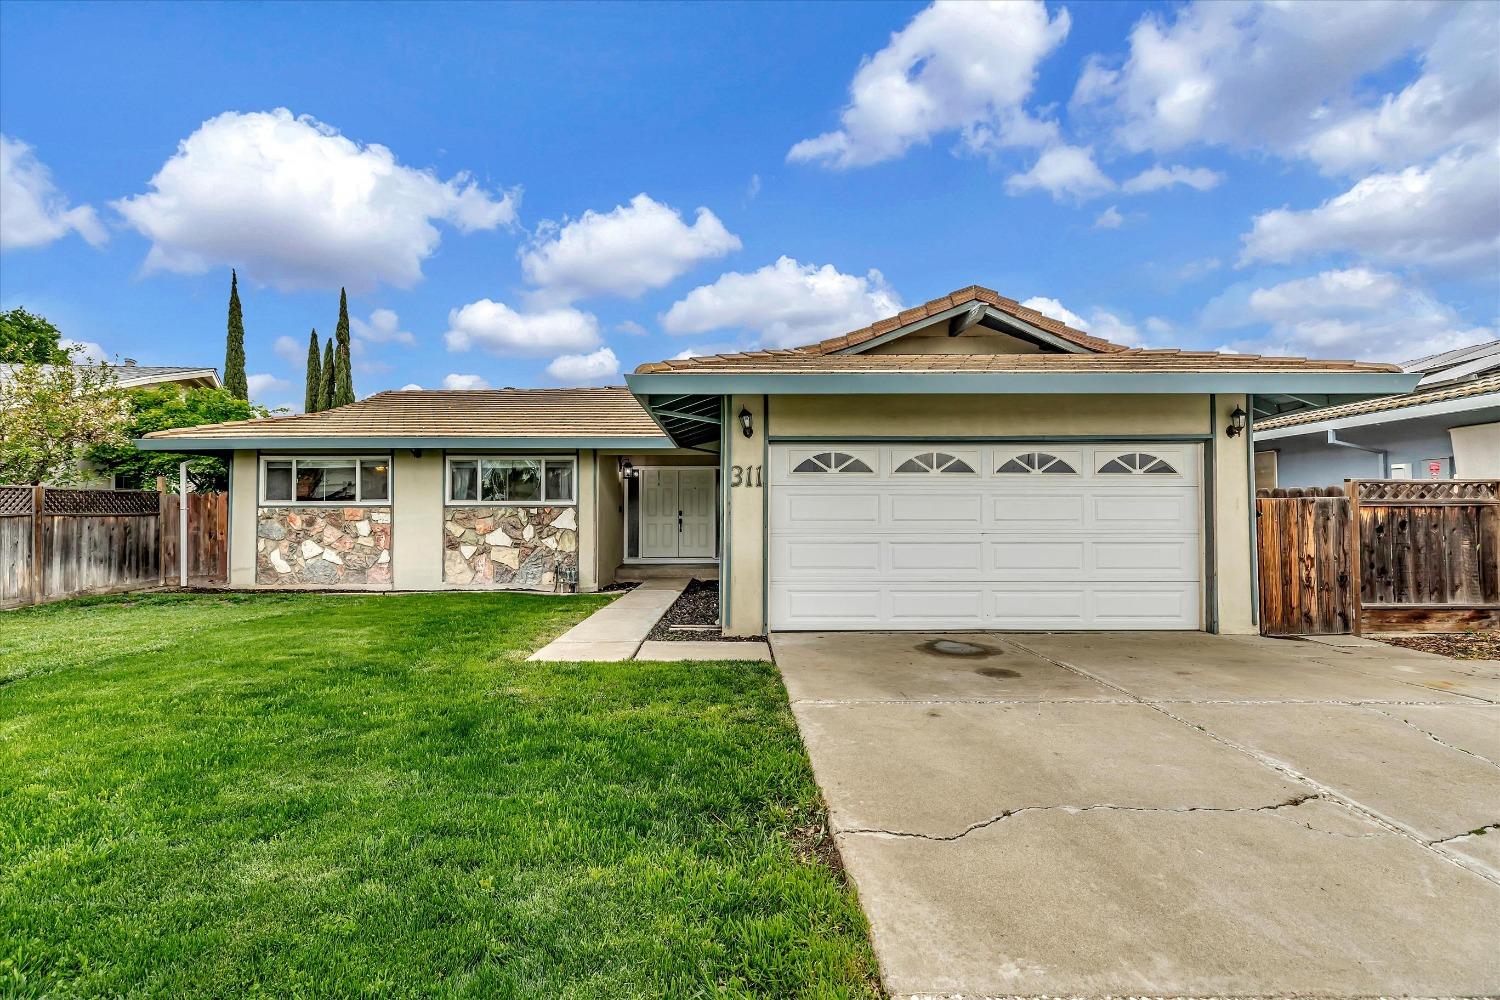 Photo of 311 Laguna Dr in Tracy, CA